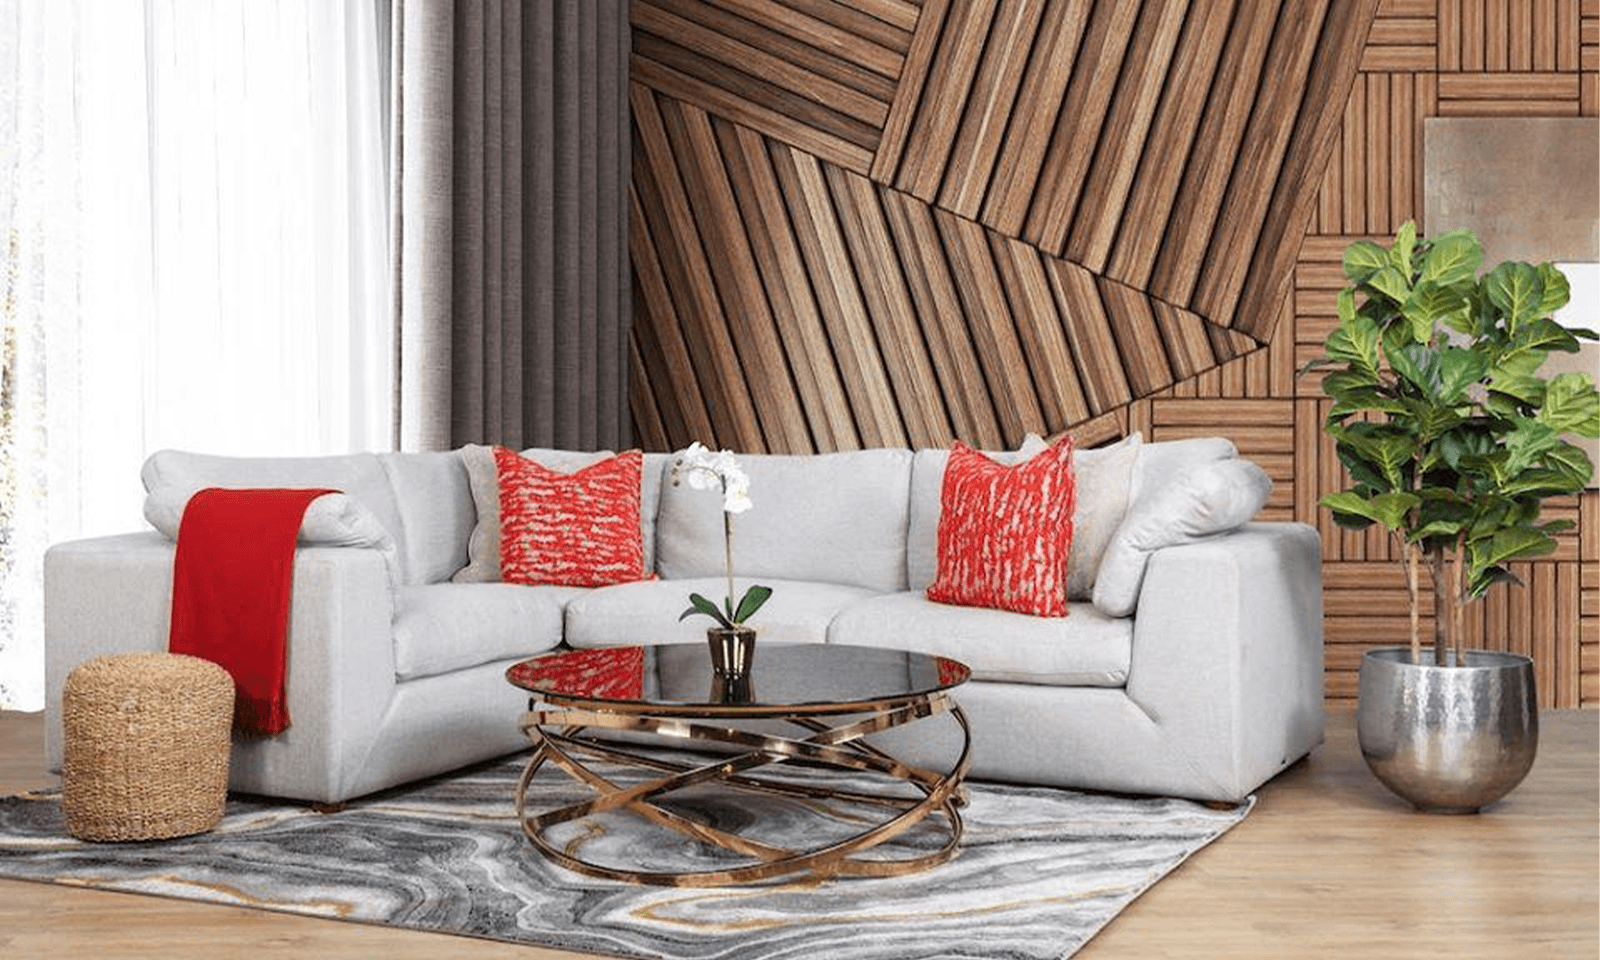 HOW TO STYLE A MODERN LIVING ROOM